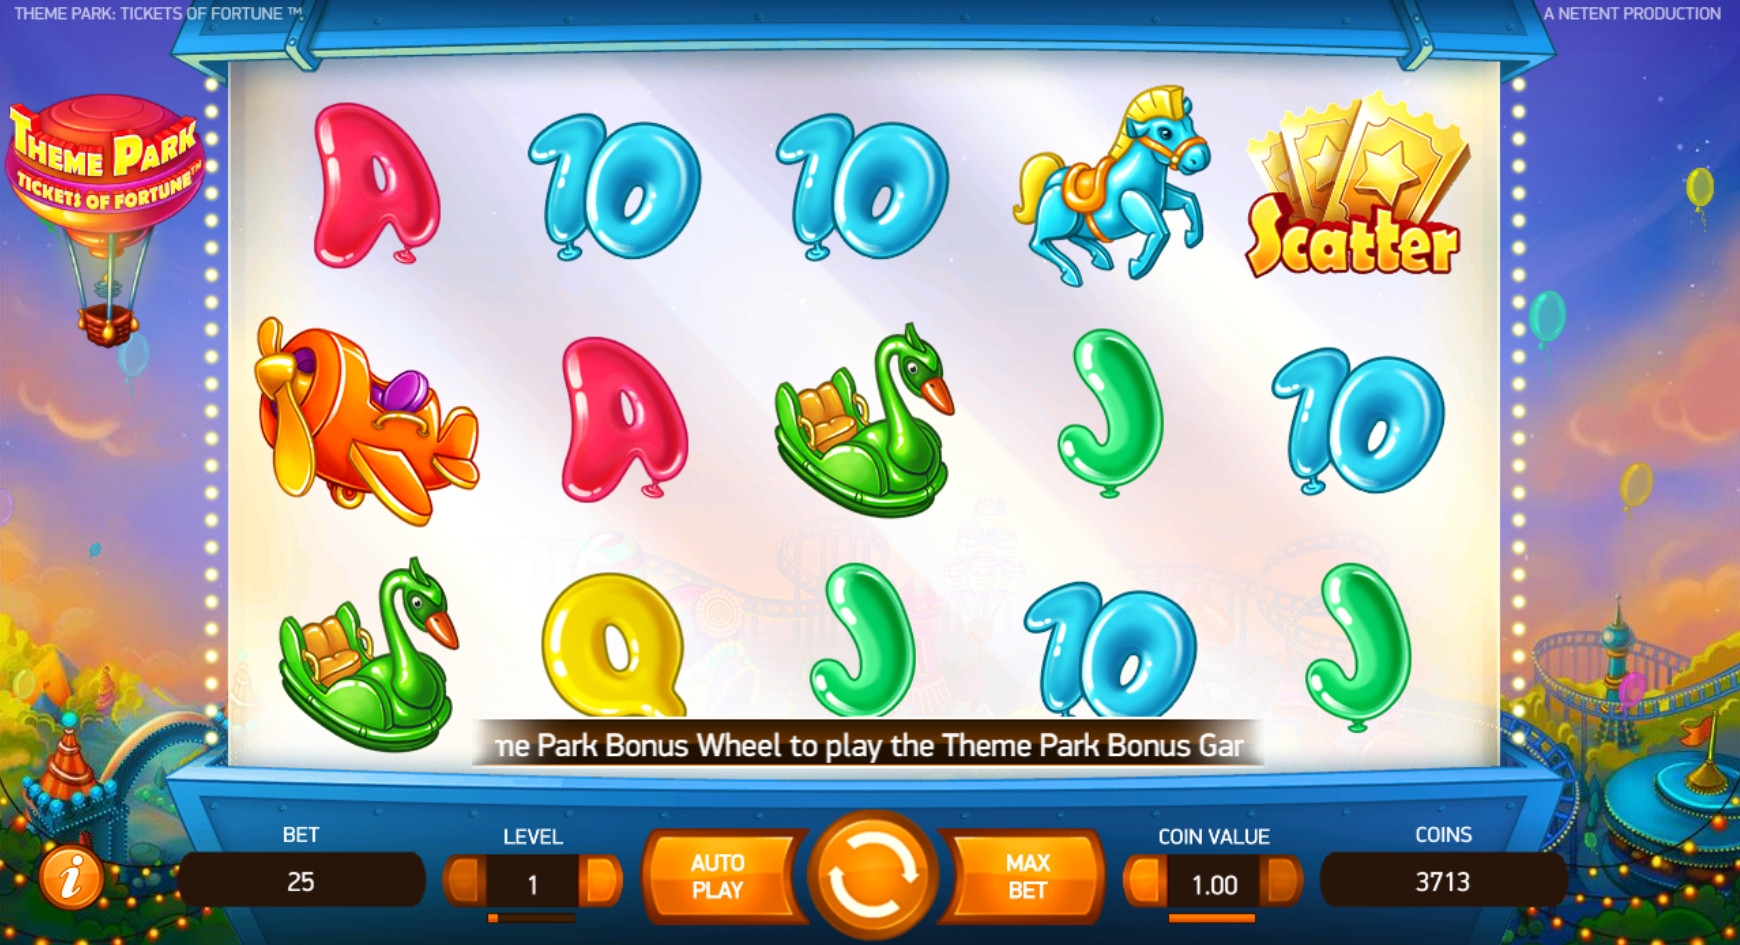 Theme Park: Tickets of Fortune (Theme Park: Tickets of Fortune) from category Slots